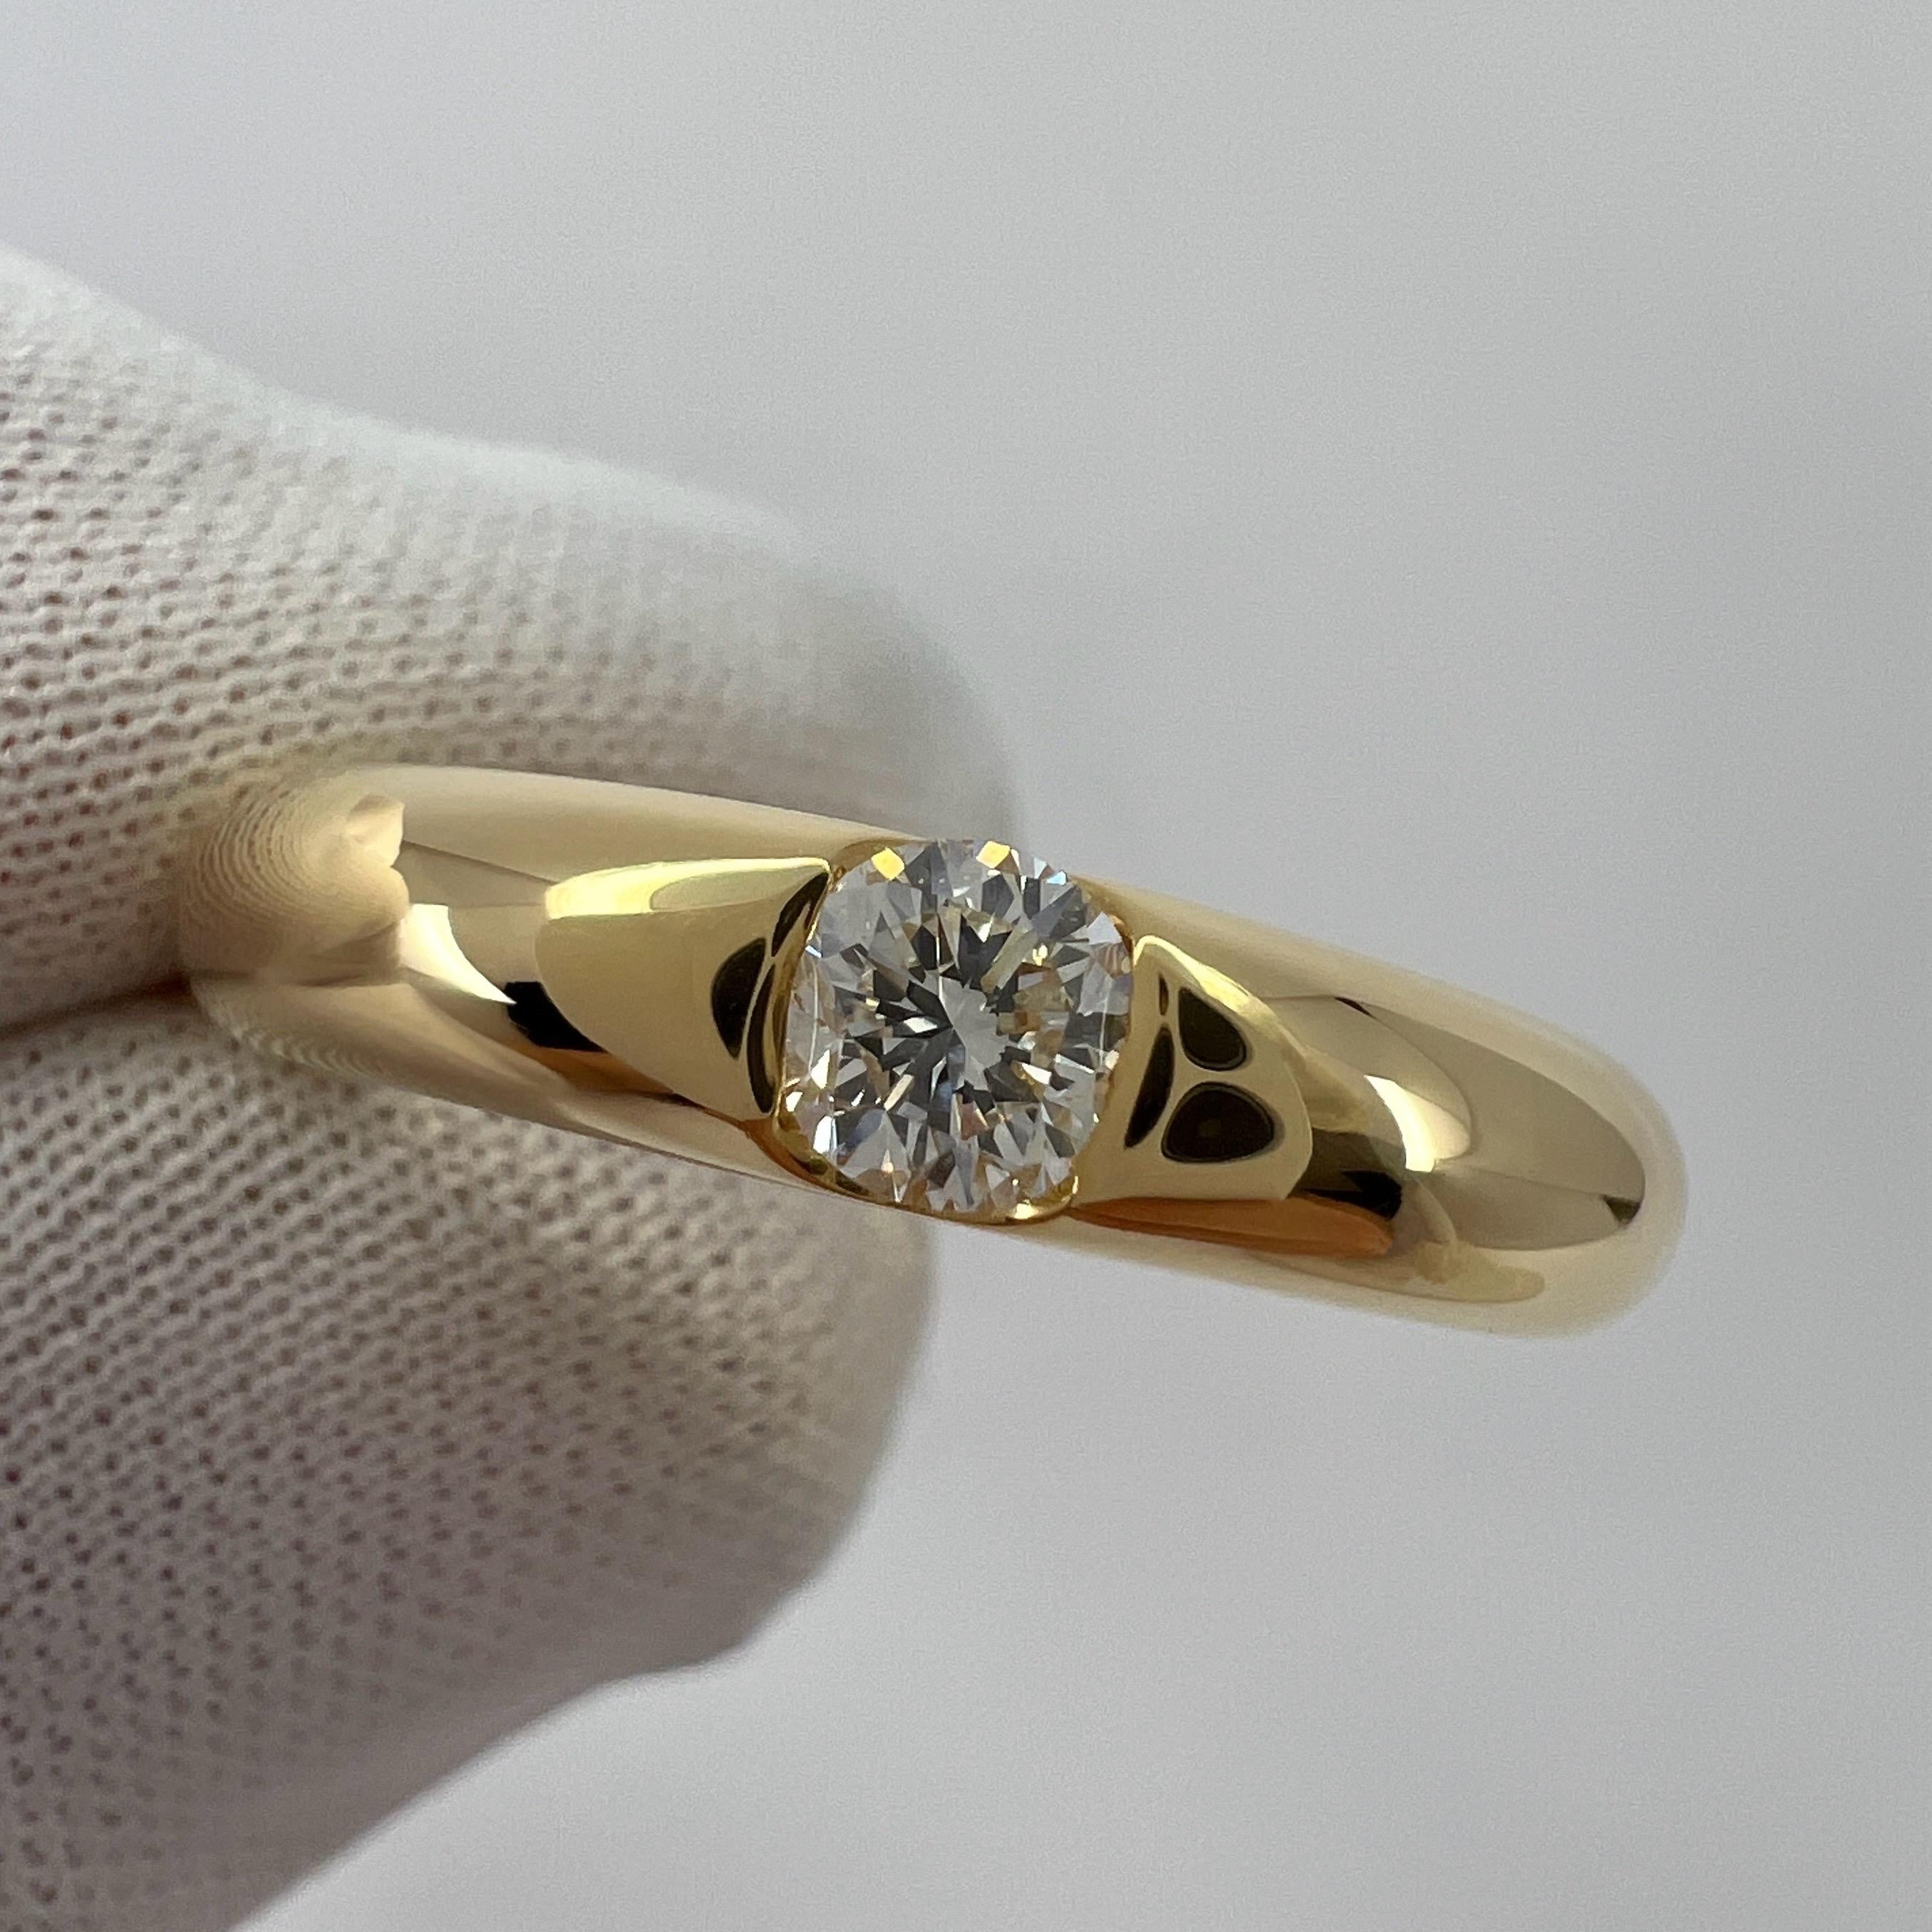 Vintage Cartier Round Diamond Ellipse 18k Yellow Gold Solitaire Band Ring US5 49 In Excellent Condition For Sale In Birmingham, GB